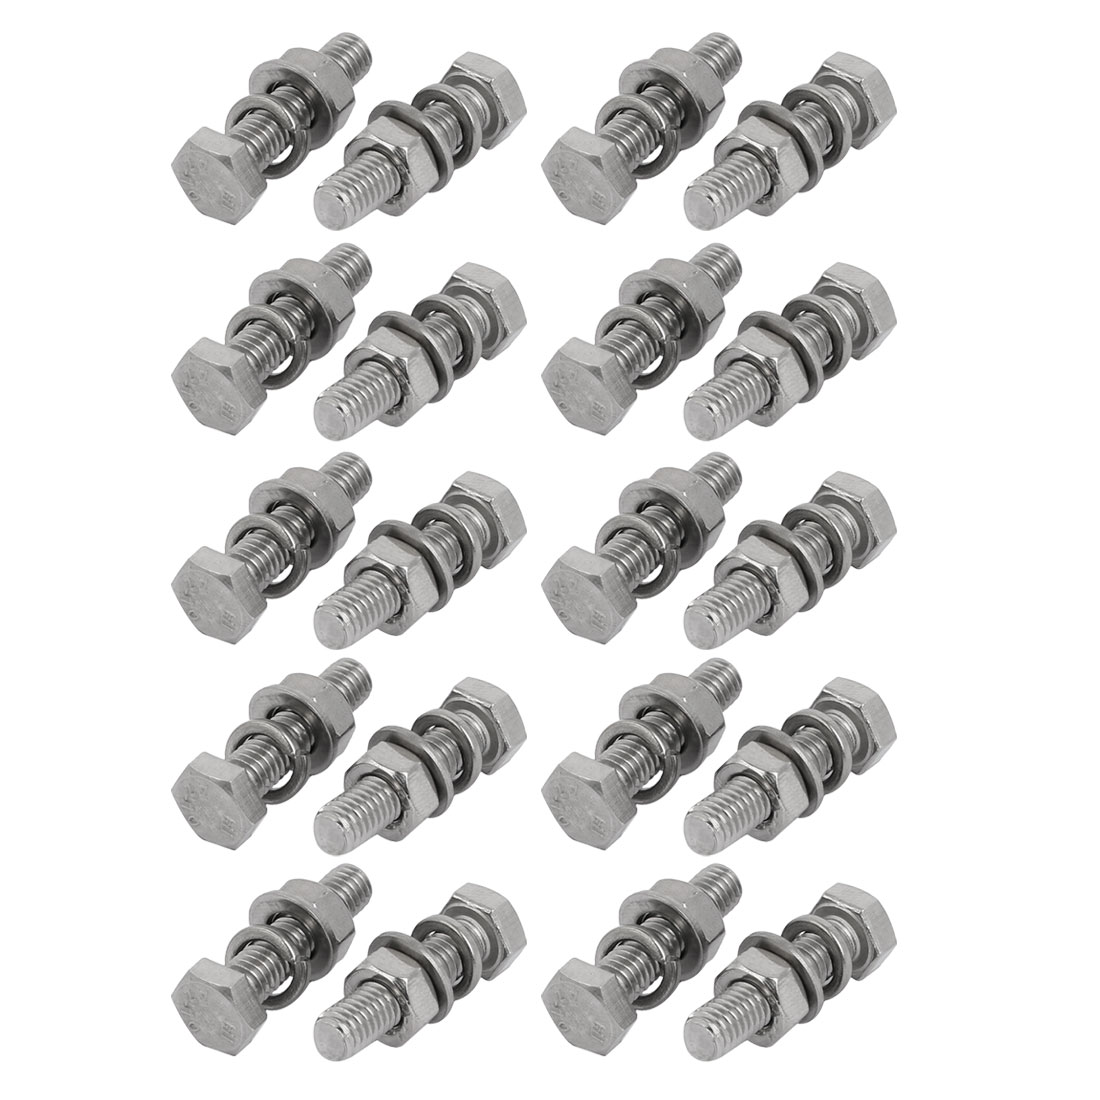 Unique Bargains 20pcs 304 Stainless Steel M6x25mm Hex Bolts w Nuts and  Washers Assortment Kit